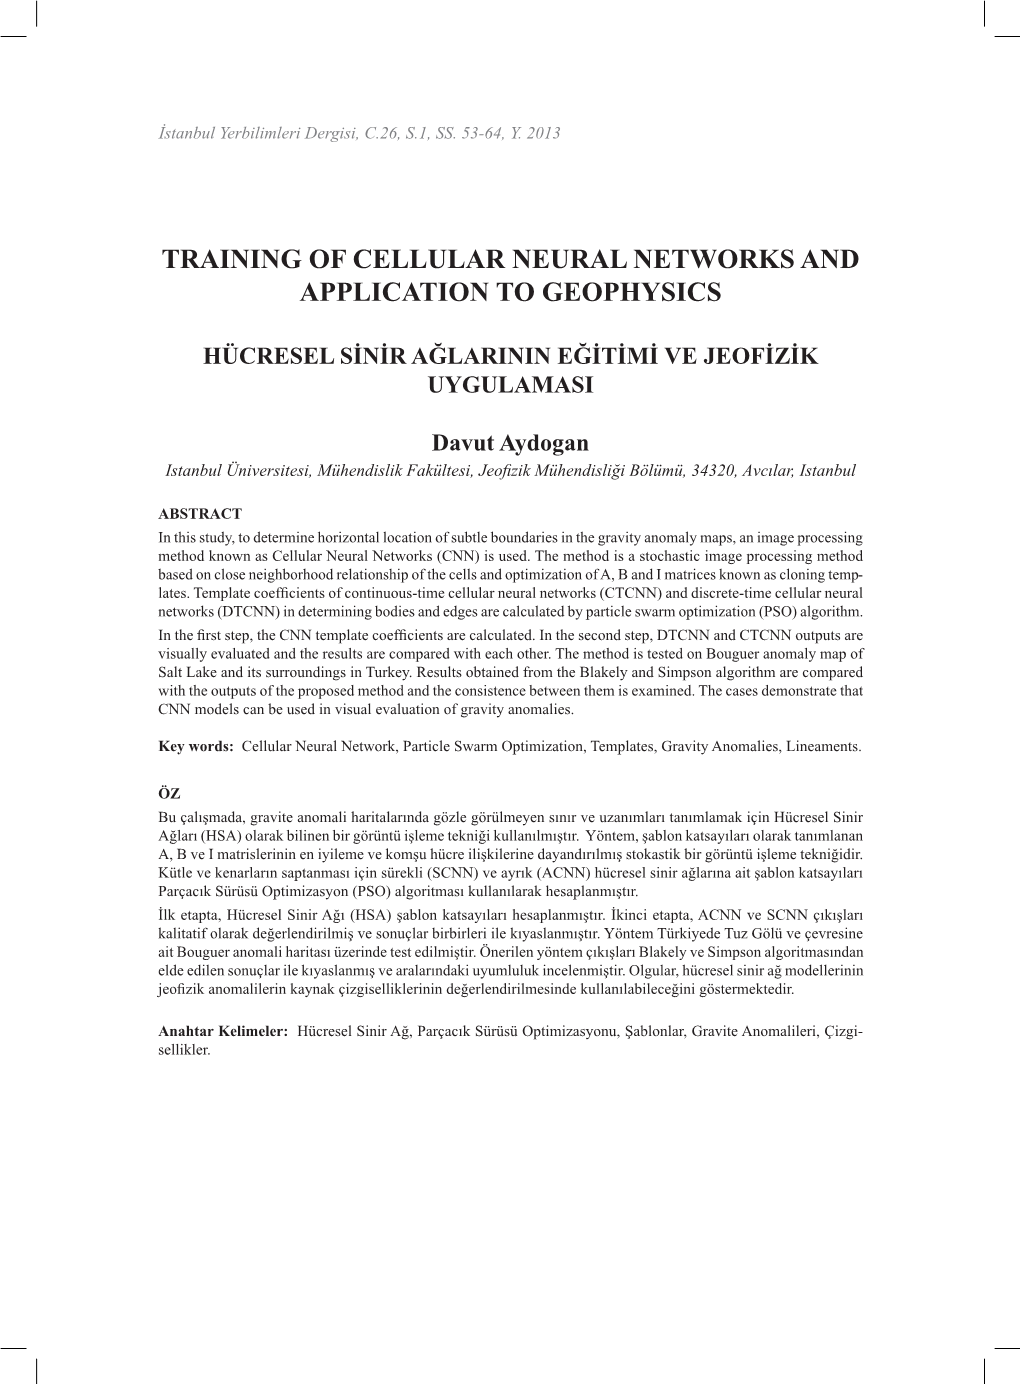 Training of Cellular Neural Networks and Application to Geophysics